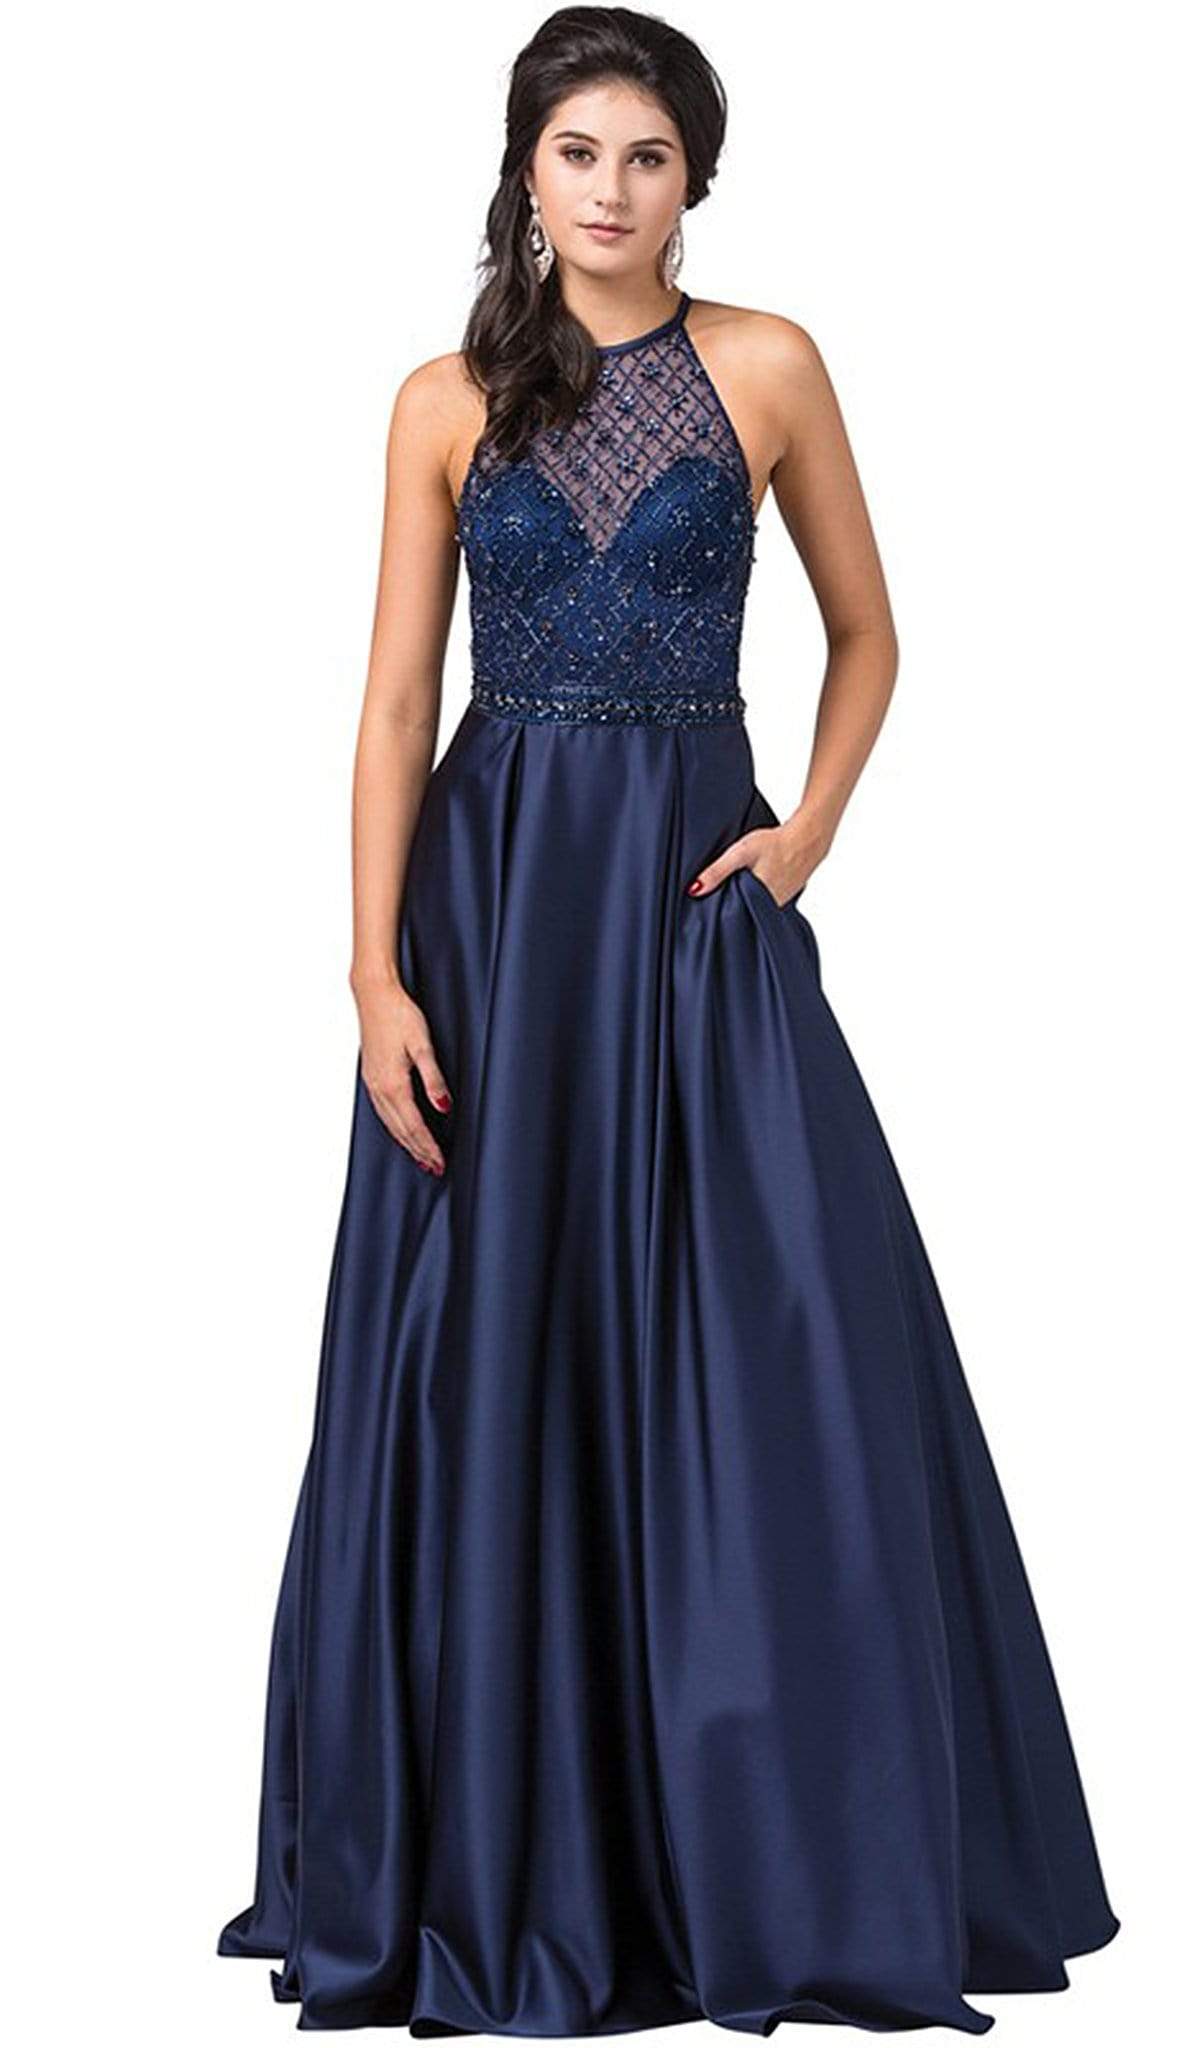 Dancing Queen - 2744 Embellished Halter Pleated A-line Gown
